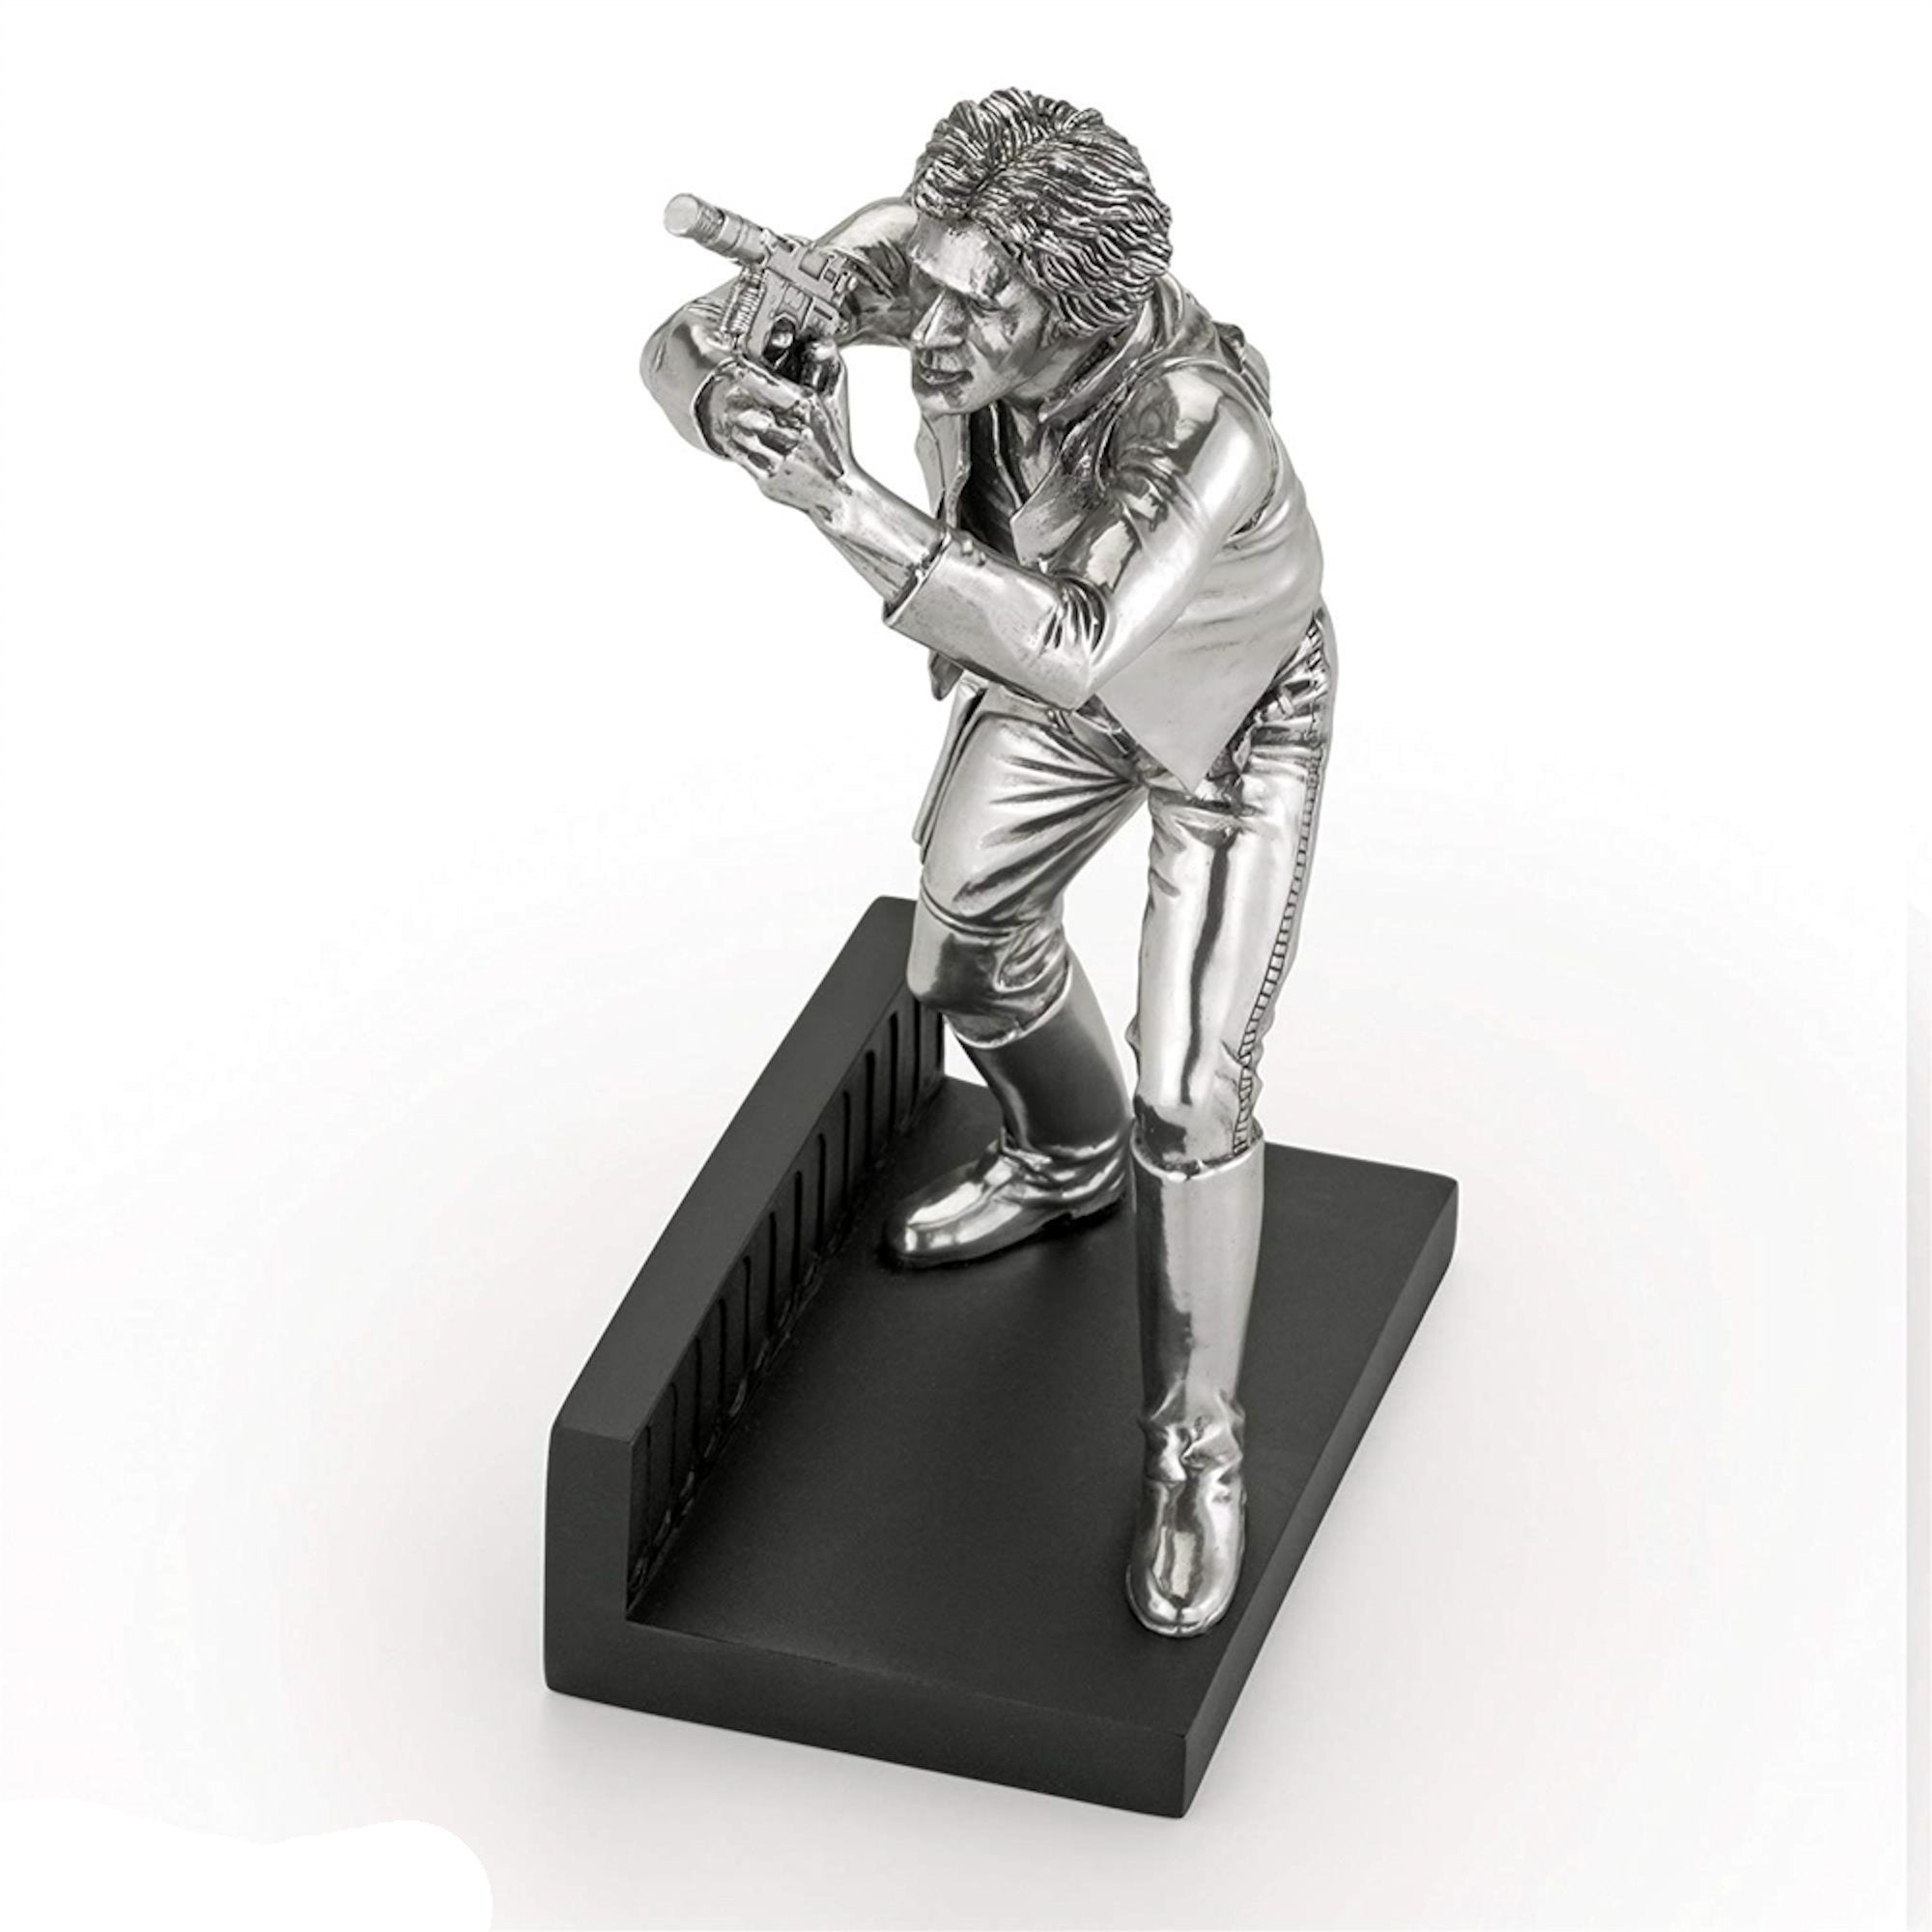 Star Wars By Royal Selangor ES6970B LIMITED EDITION Han Solo Pewter Figurine product